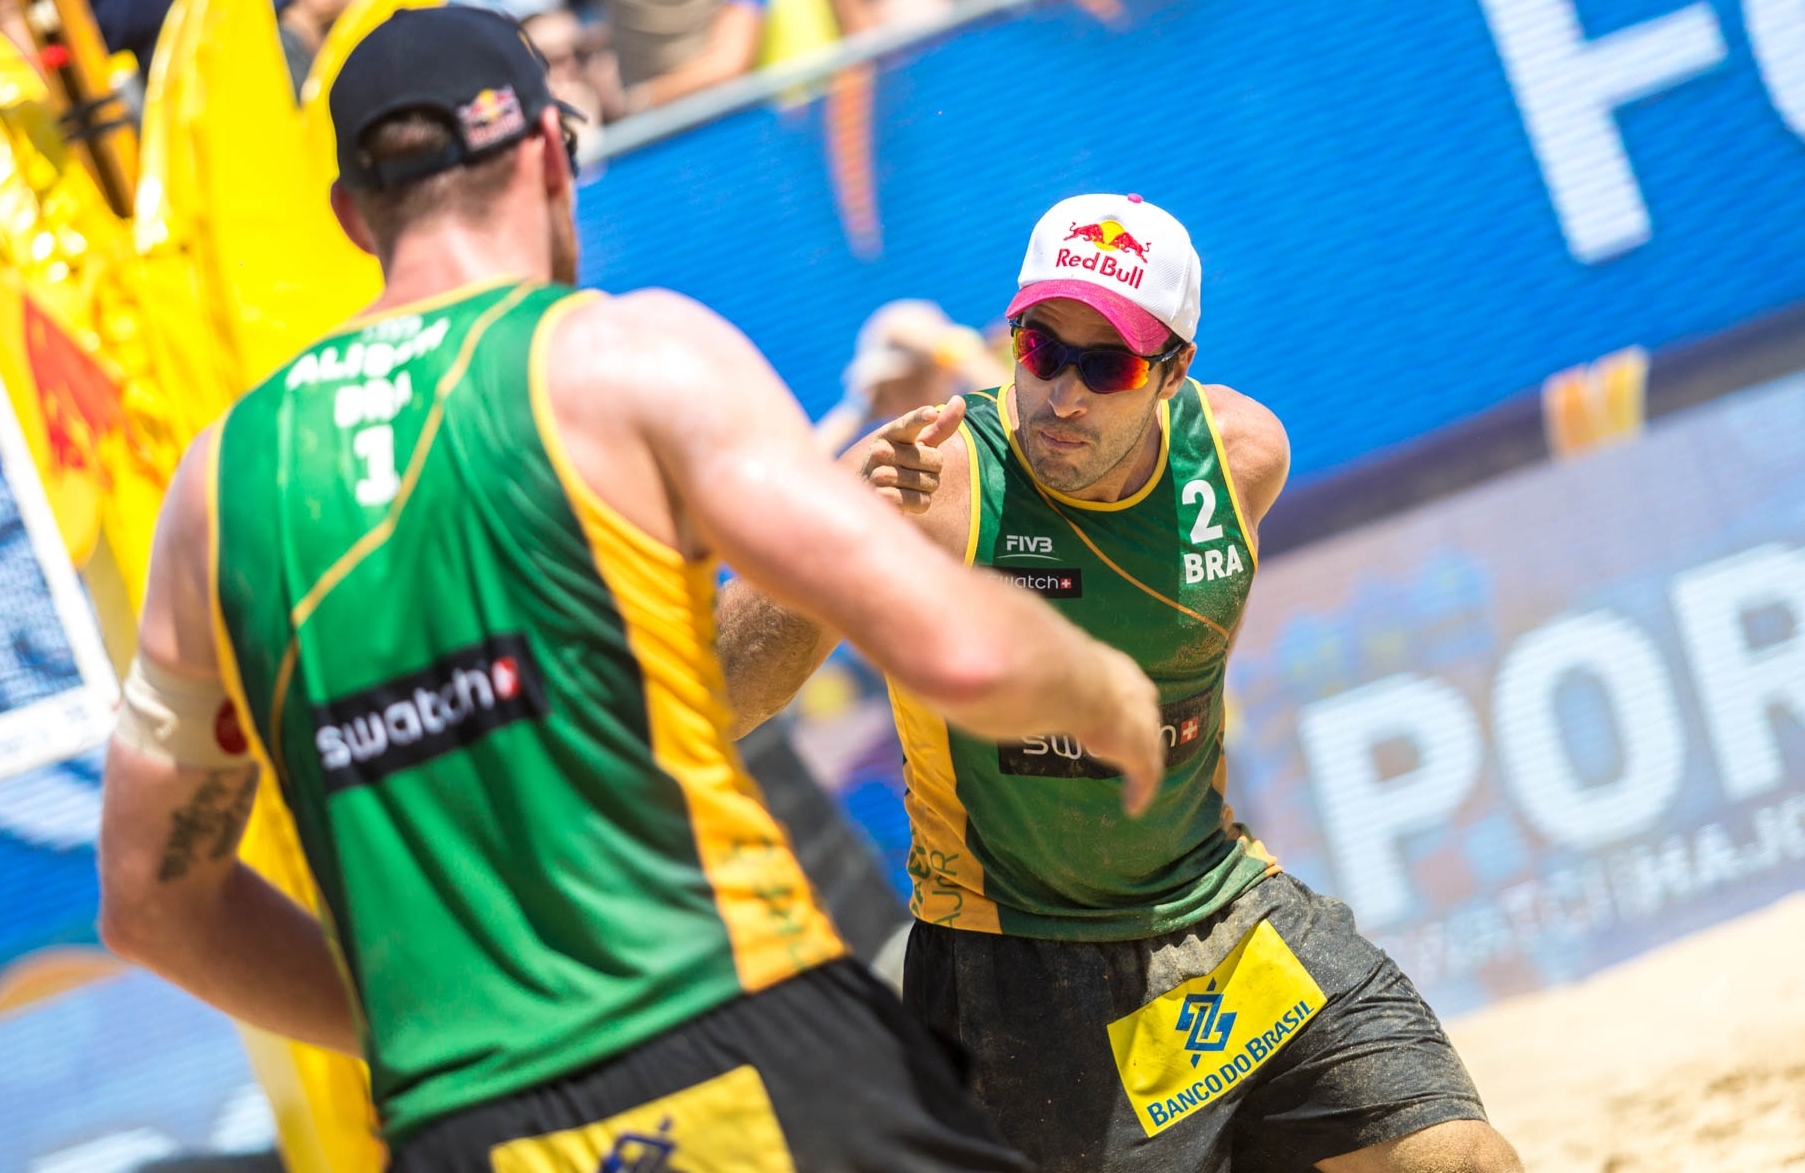 Will the boys from Brazil grab gold on Sunday? Photocredit: Stefan Moertl